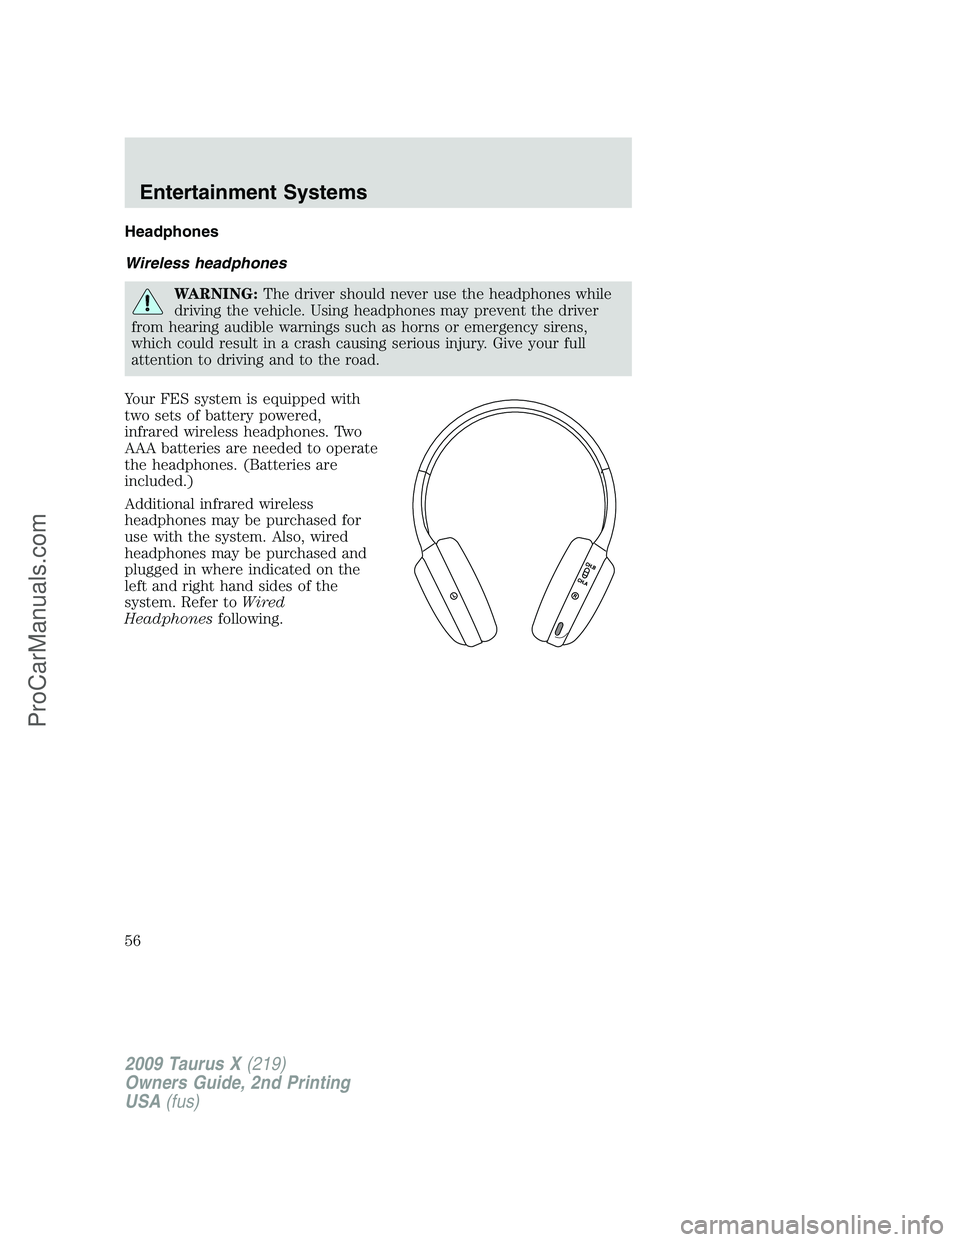 FORD FREESTYLE 2009 Workshop Manual Headphones
Wireless headphones
WARNING:The driver should never use the headphones while
driving the vehicle. Using headphones may prevent the driver
from hearing audible warnings such as horns or emer